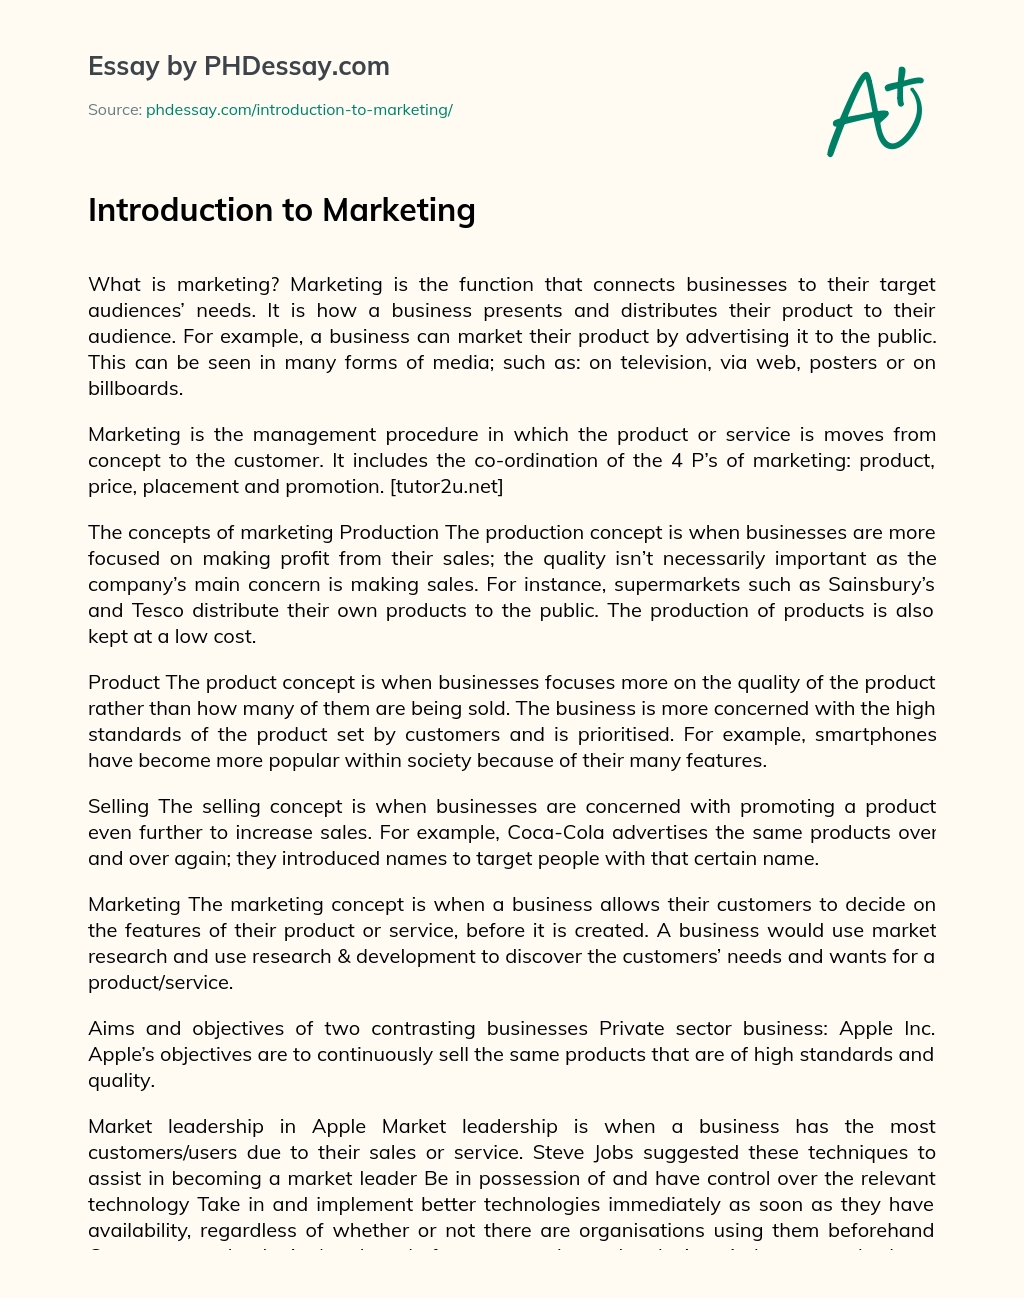 Introduction to Marketing essay